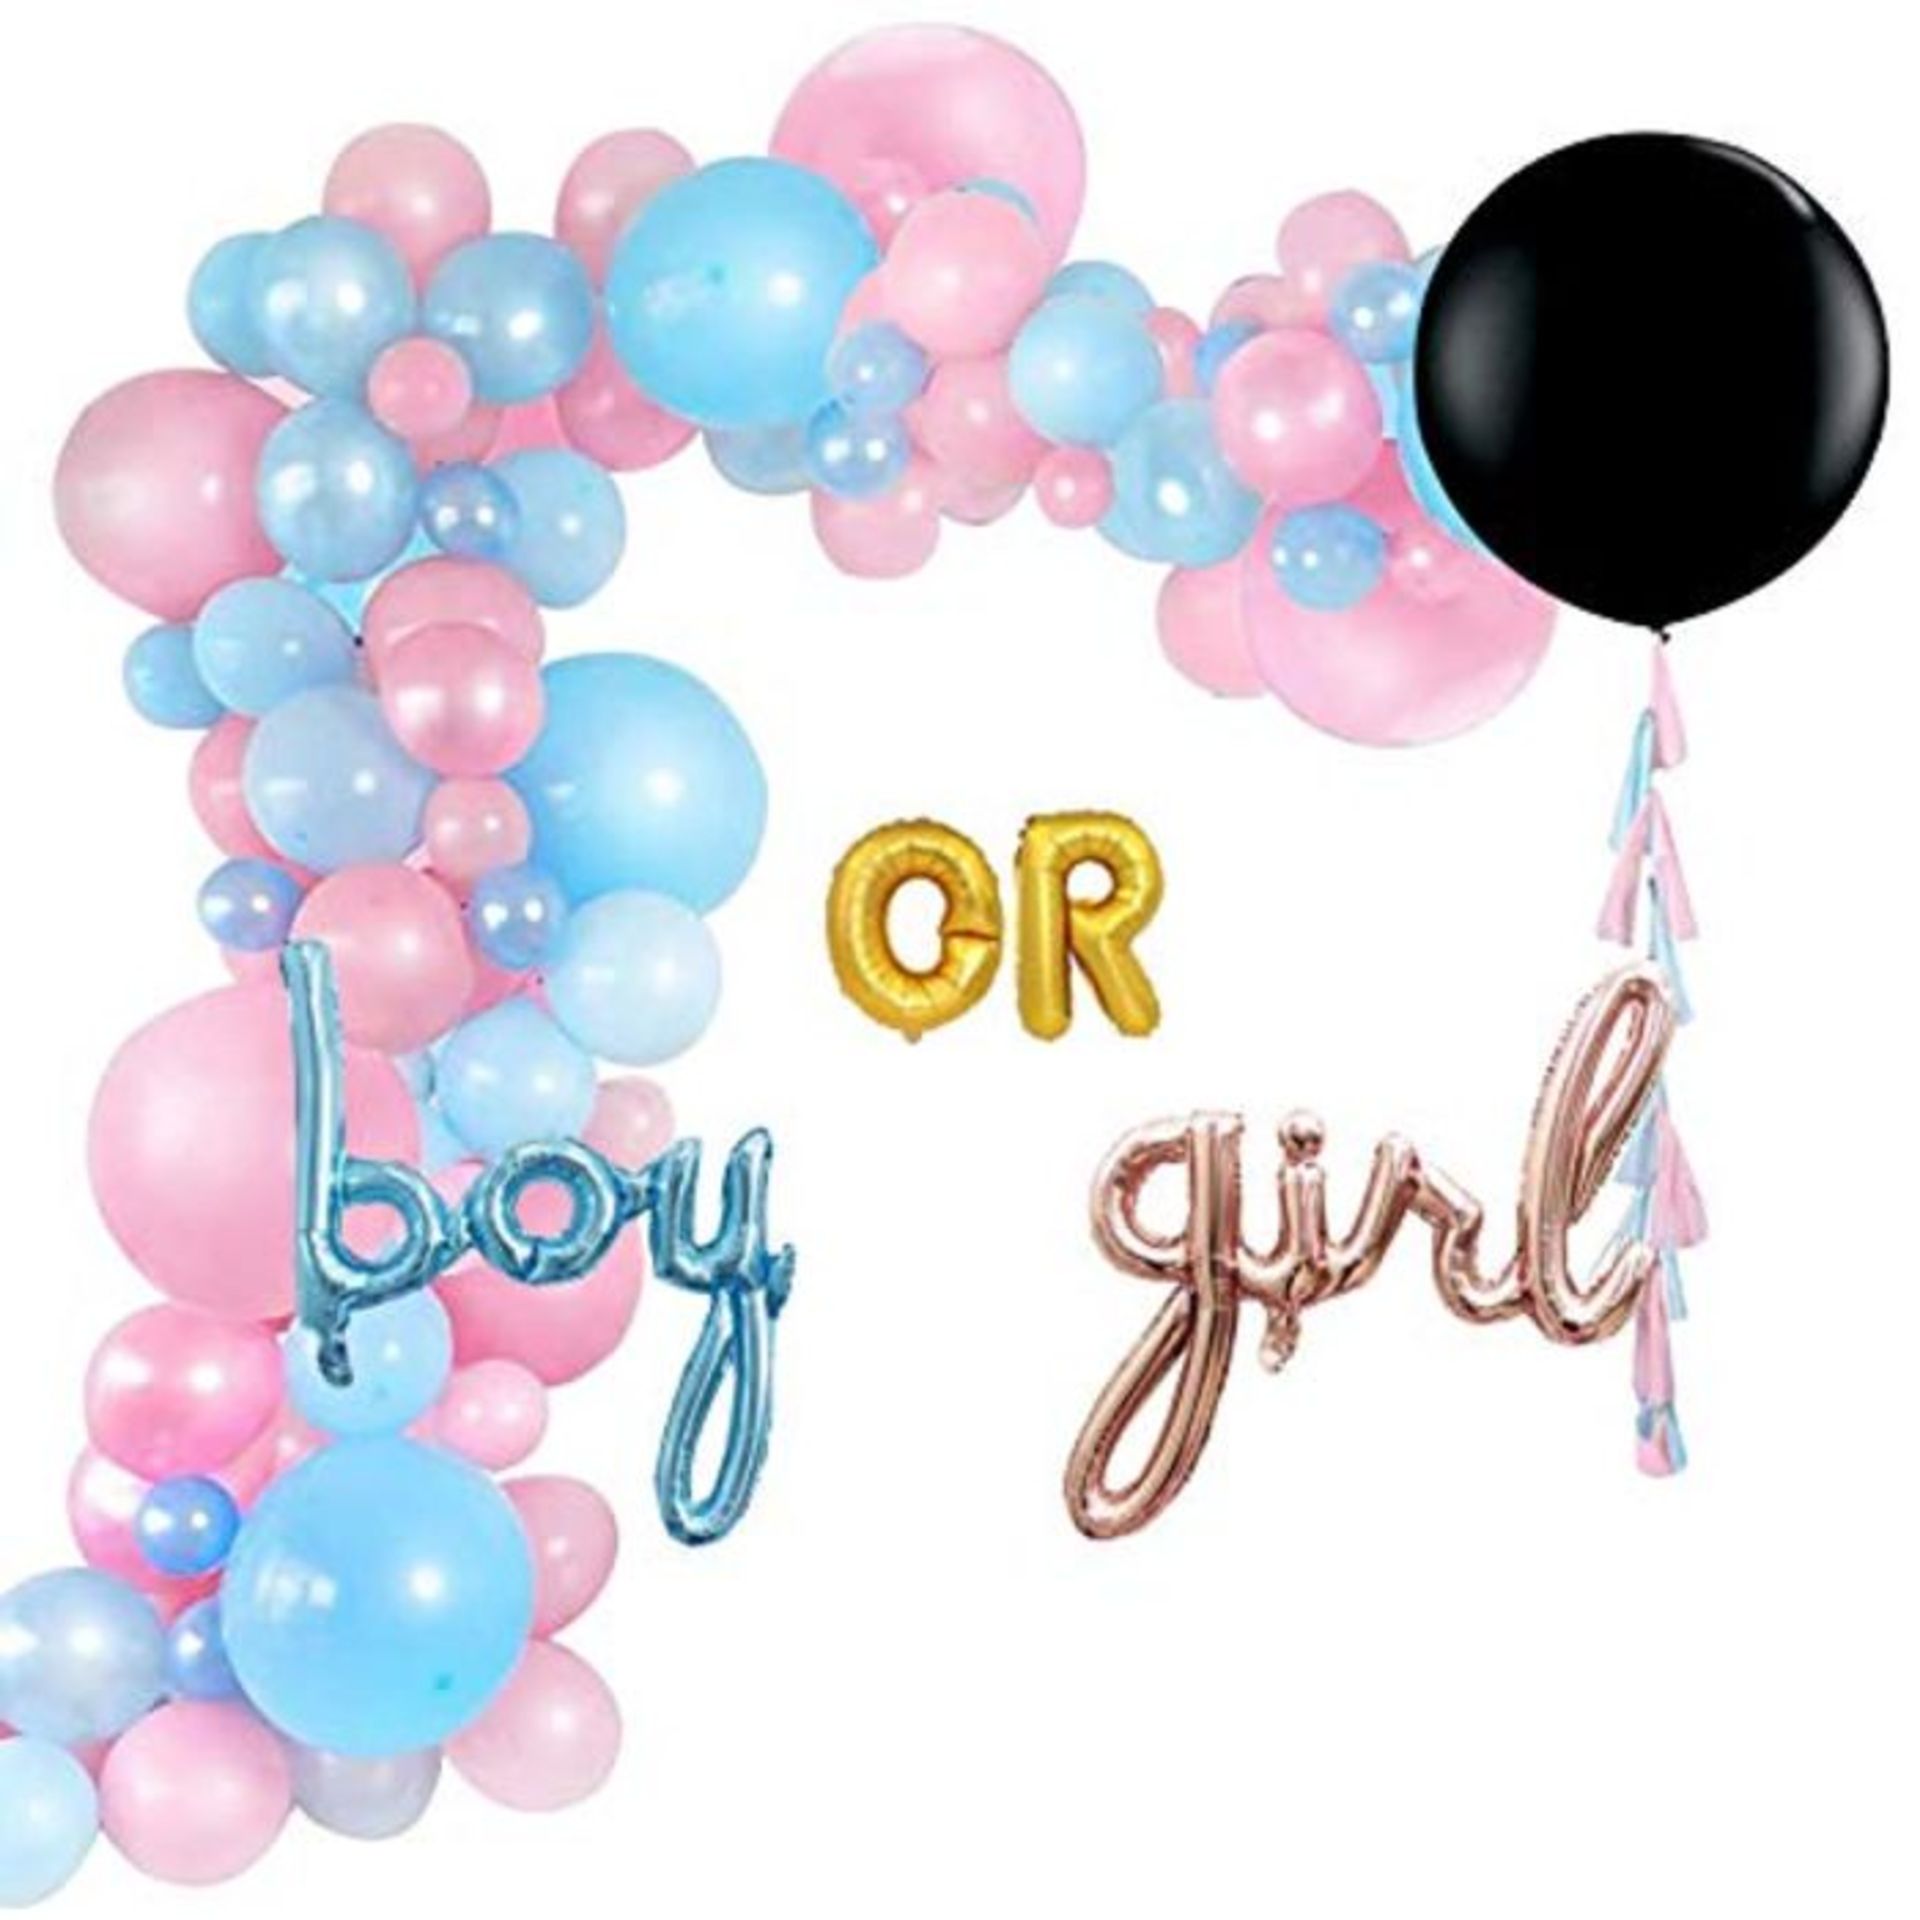 Formemory 102 Pcs Gender Reveal Party Supplies Kit, Baby Gender Reveal Confetti Balloo